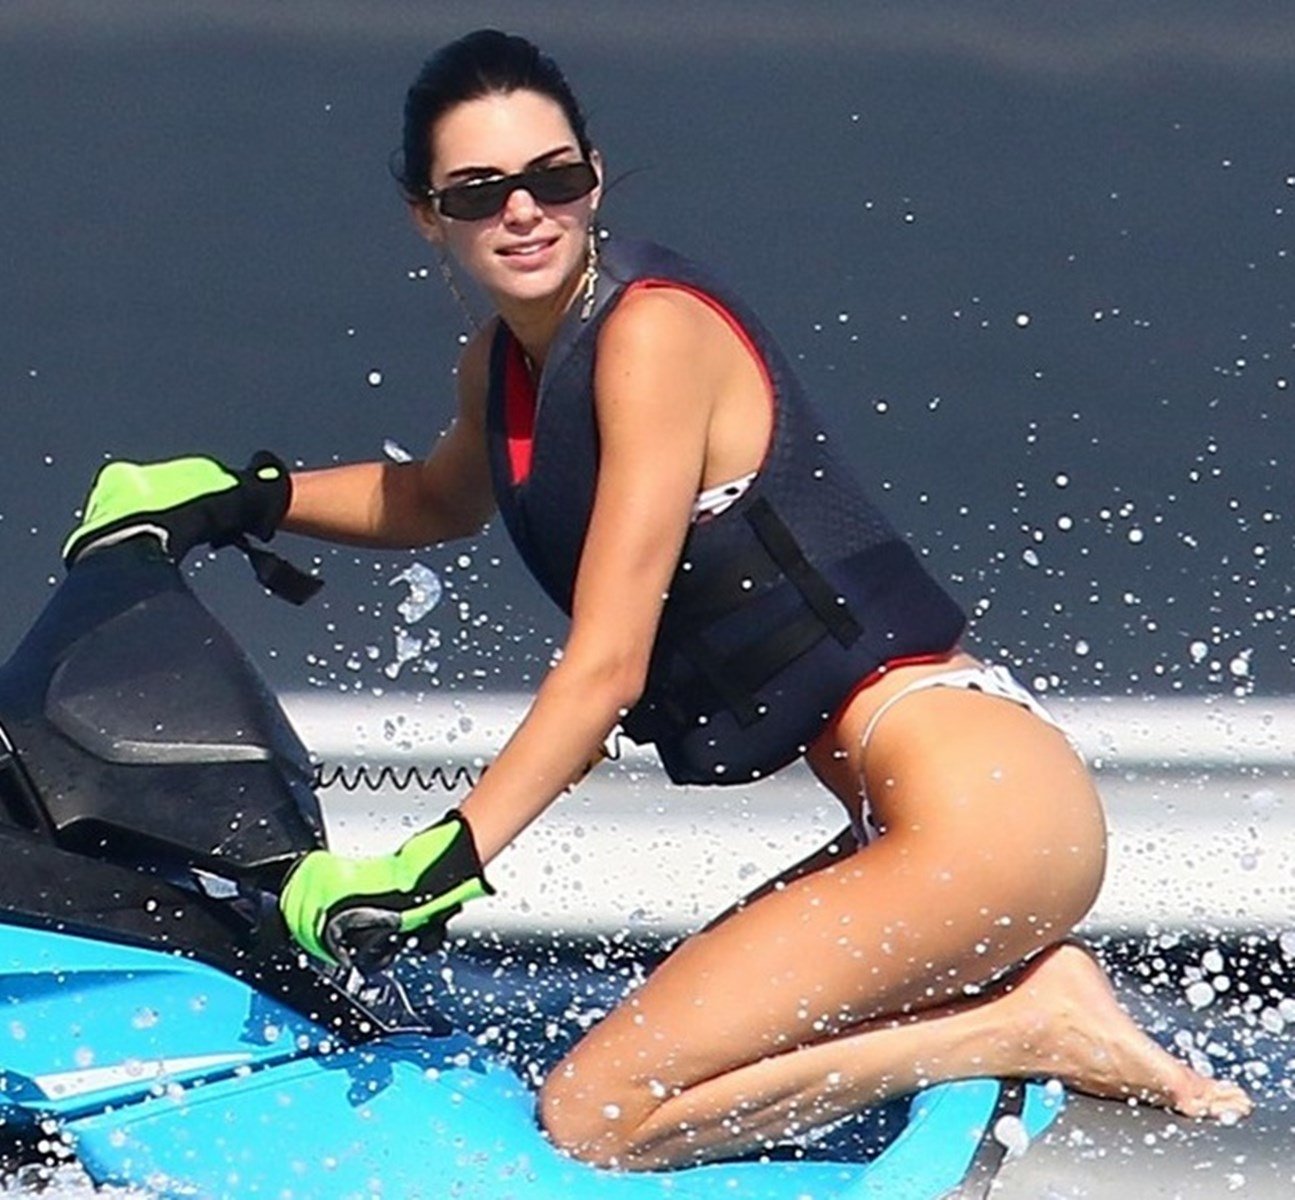 Kendall Jenner Shows Her Butthole While In A Bikini